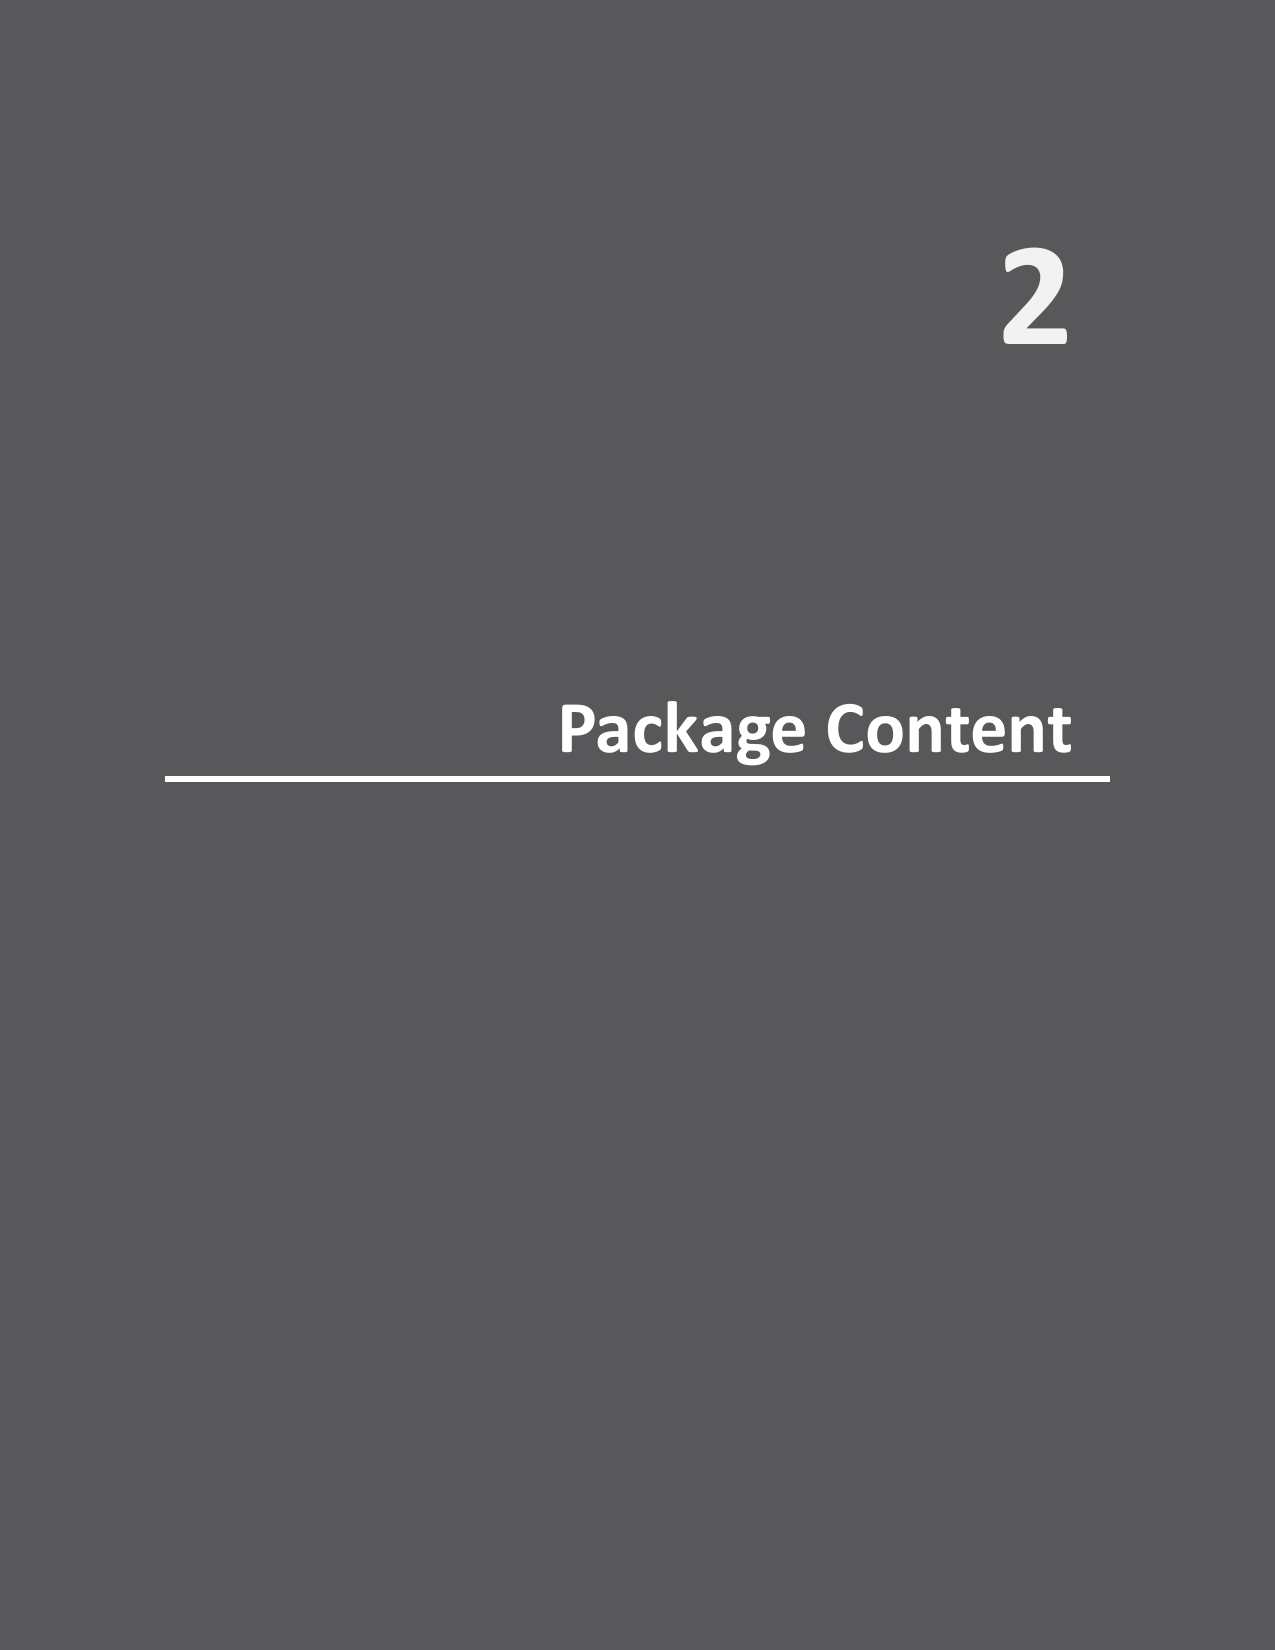   2. Package Content  S     Package Content 2 